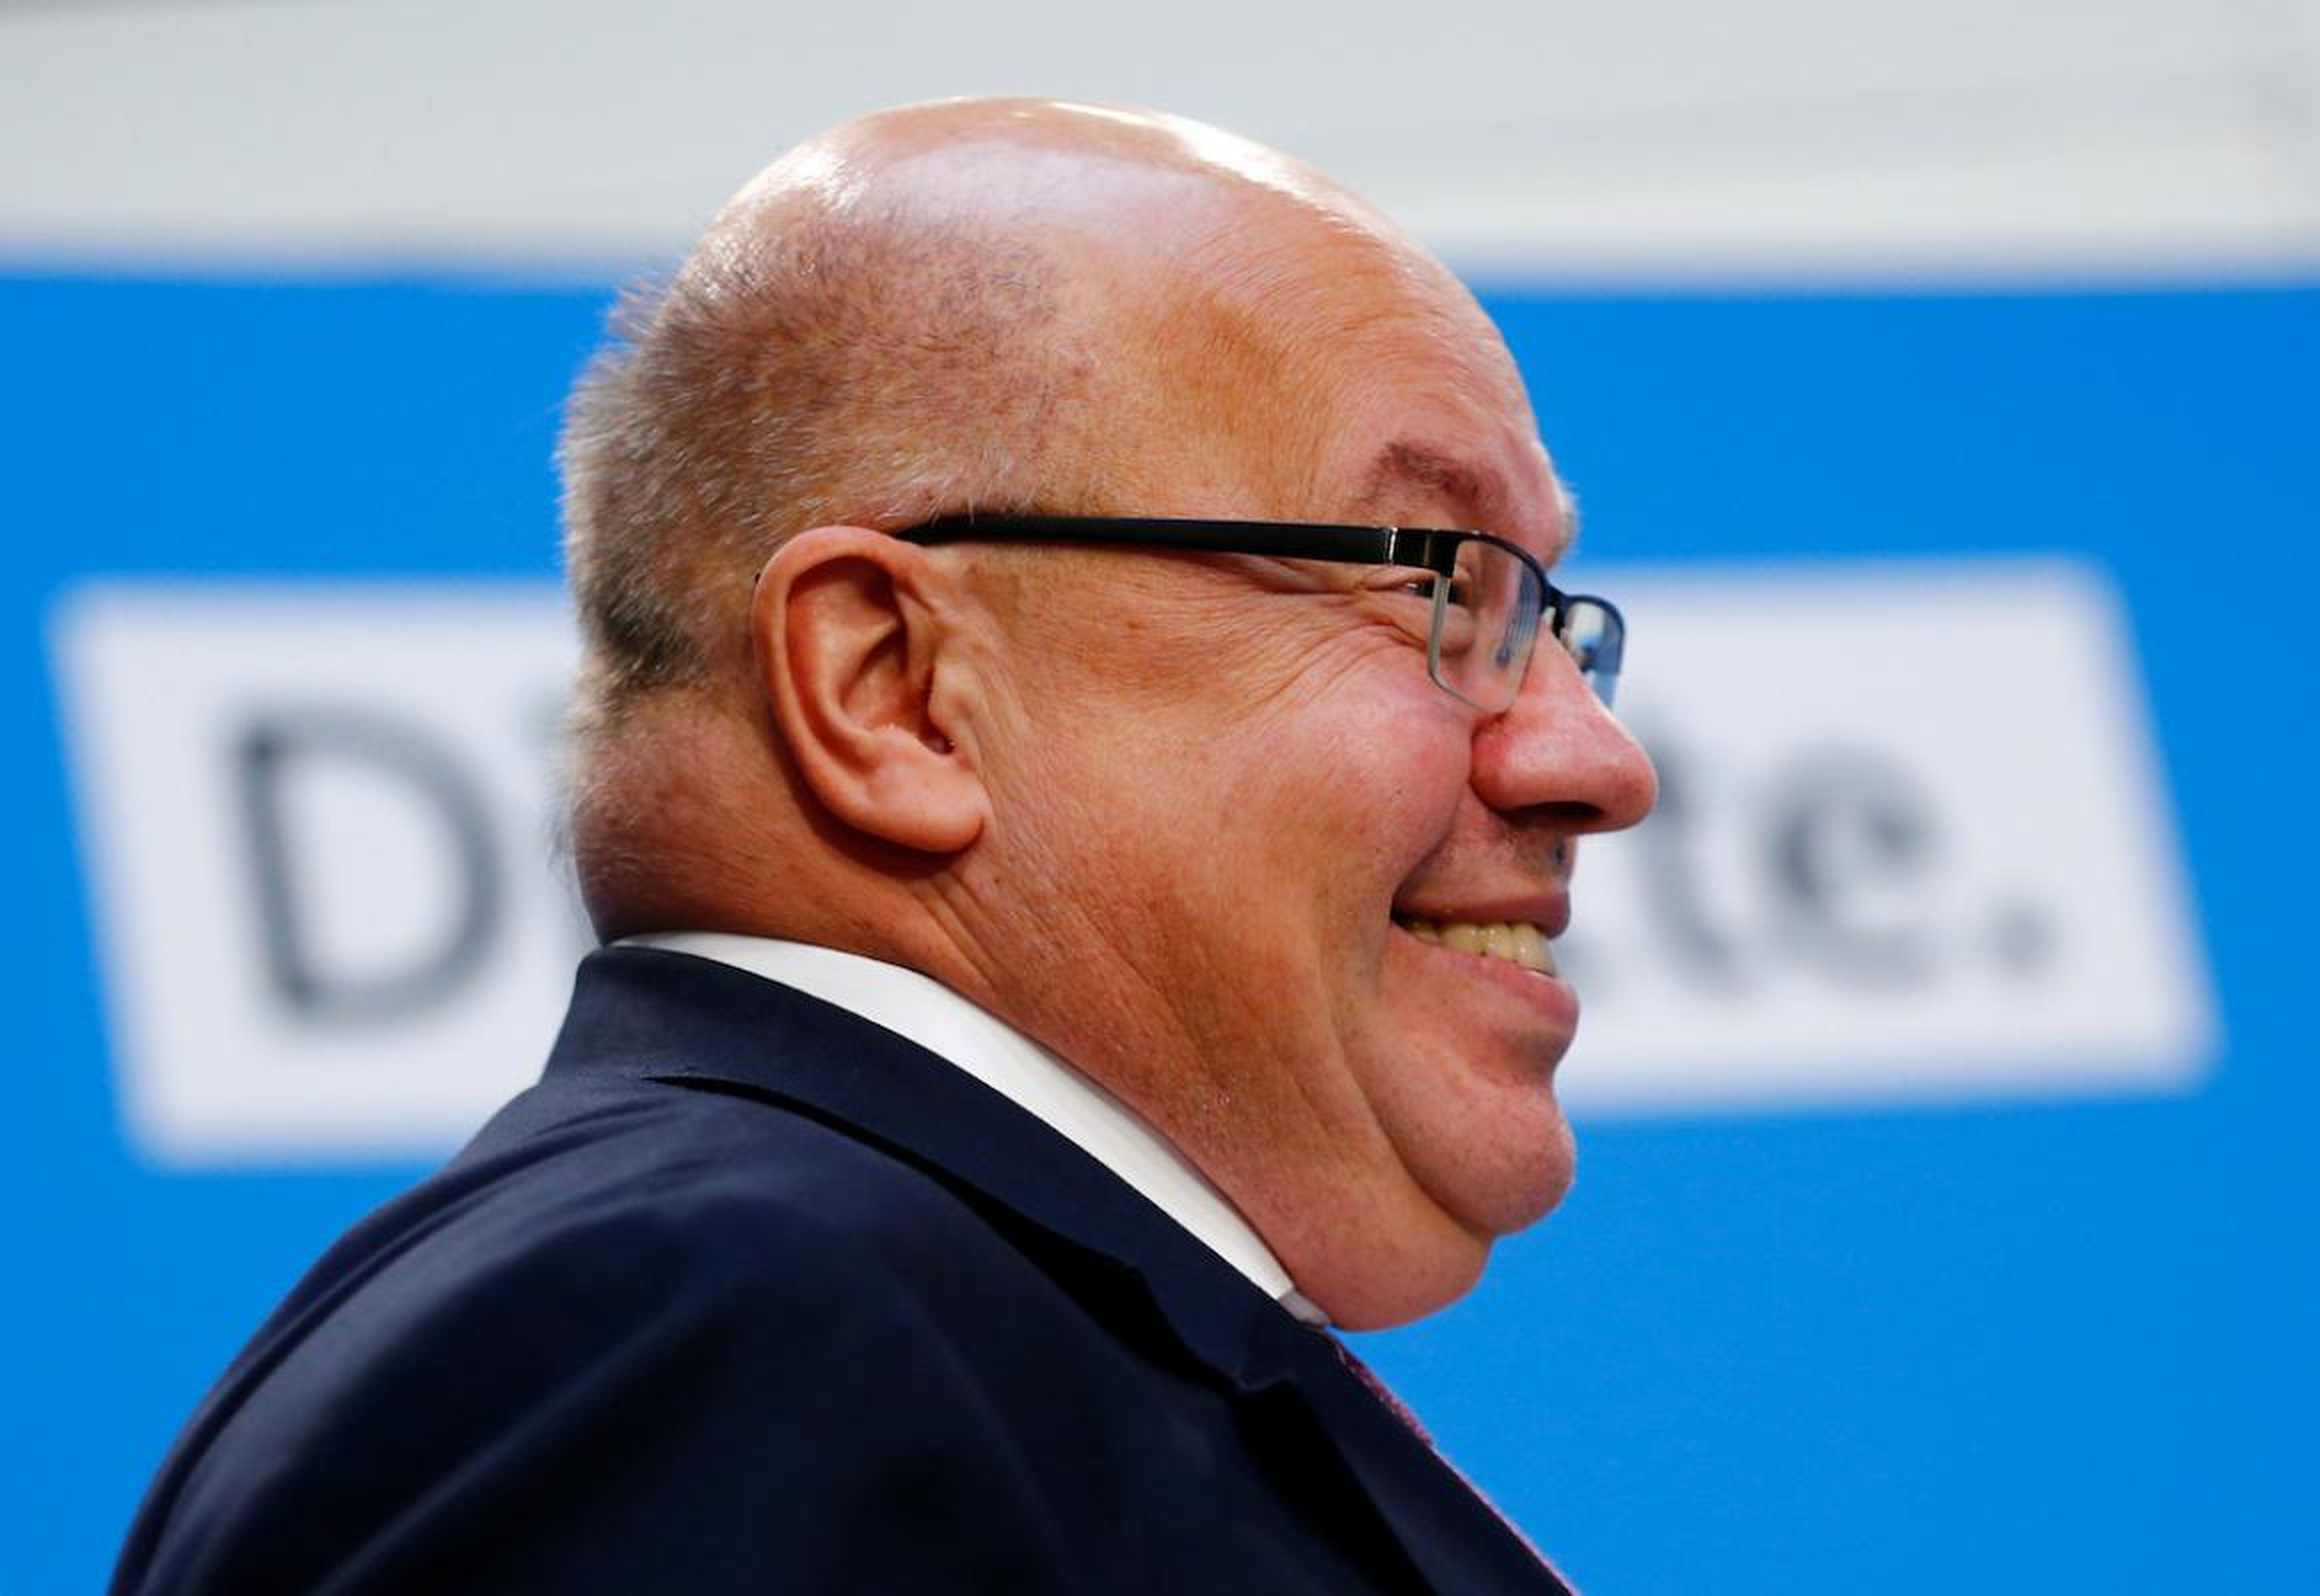 German Economy Minister Peter Altmaier arrives for a news conference of German Chancellor Angela Merkel following the Hesse state election in Berlin, Germany, October 29, 2018.